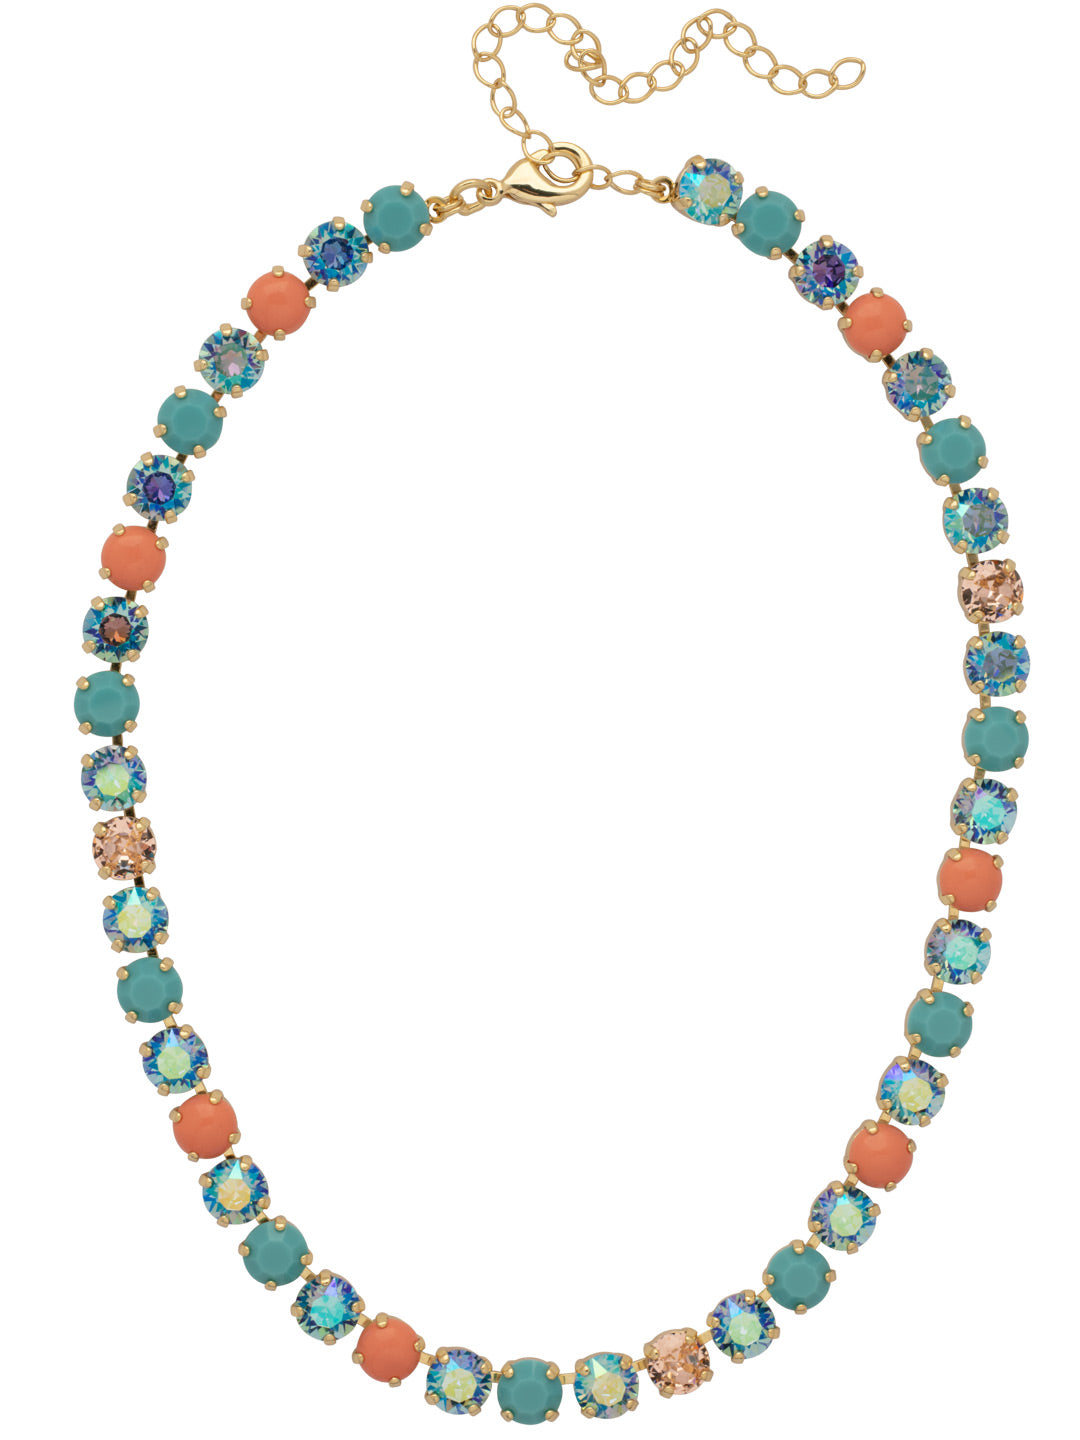 Matilda Tennis Necklace - NFJ4BGPRT - <p>The Matilda Tennis Necklace features a repeating line of round cut crystals on an adjustable chain, secured with a lobster claw clasp. From Sorrelli's Portofino collection in our Bright Gold-tone finish.</p>